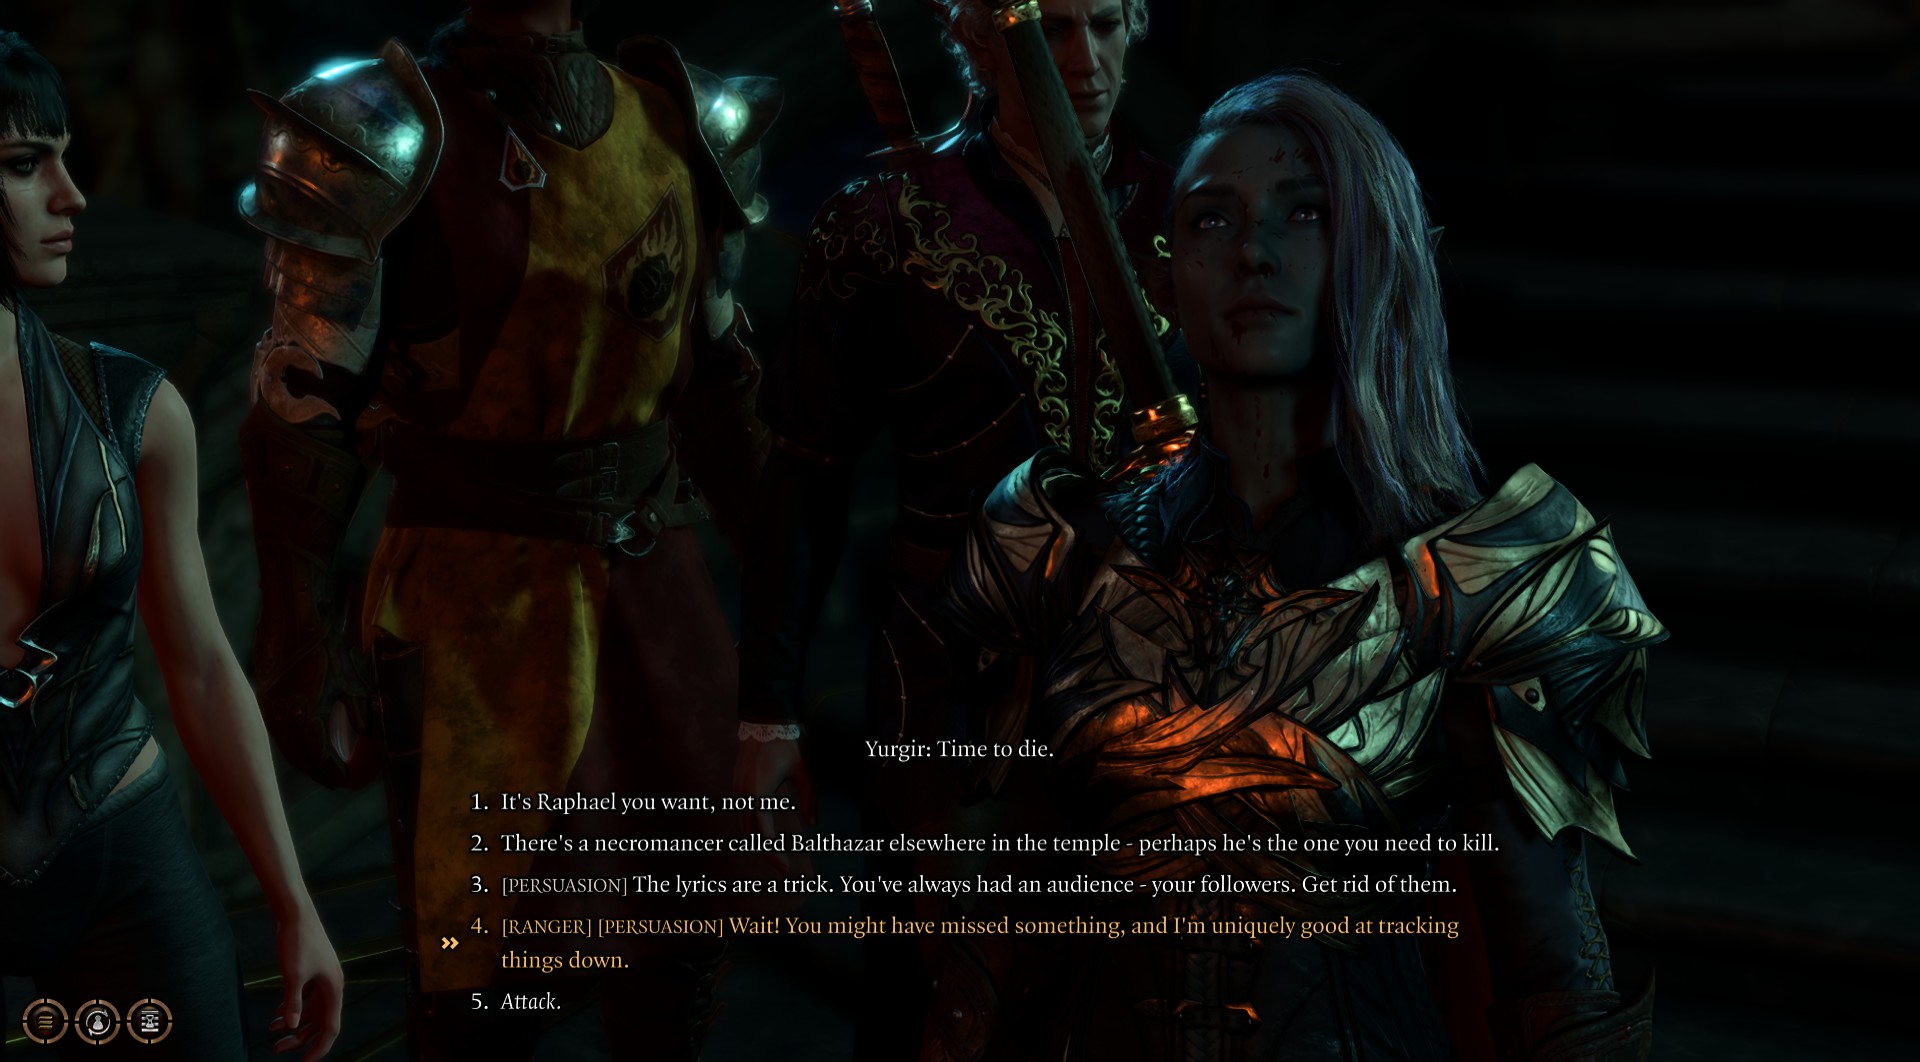 A Drow in Baldur's Gate 3 is shown interacting with an off-screen character.